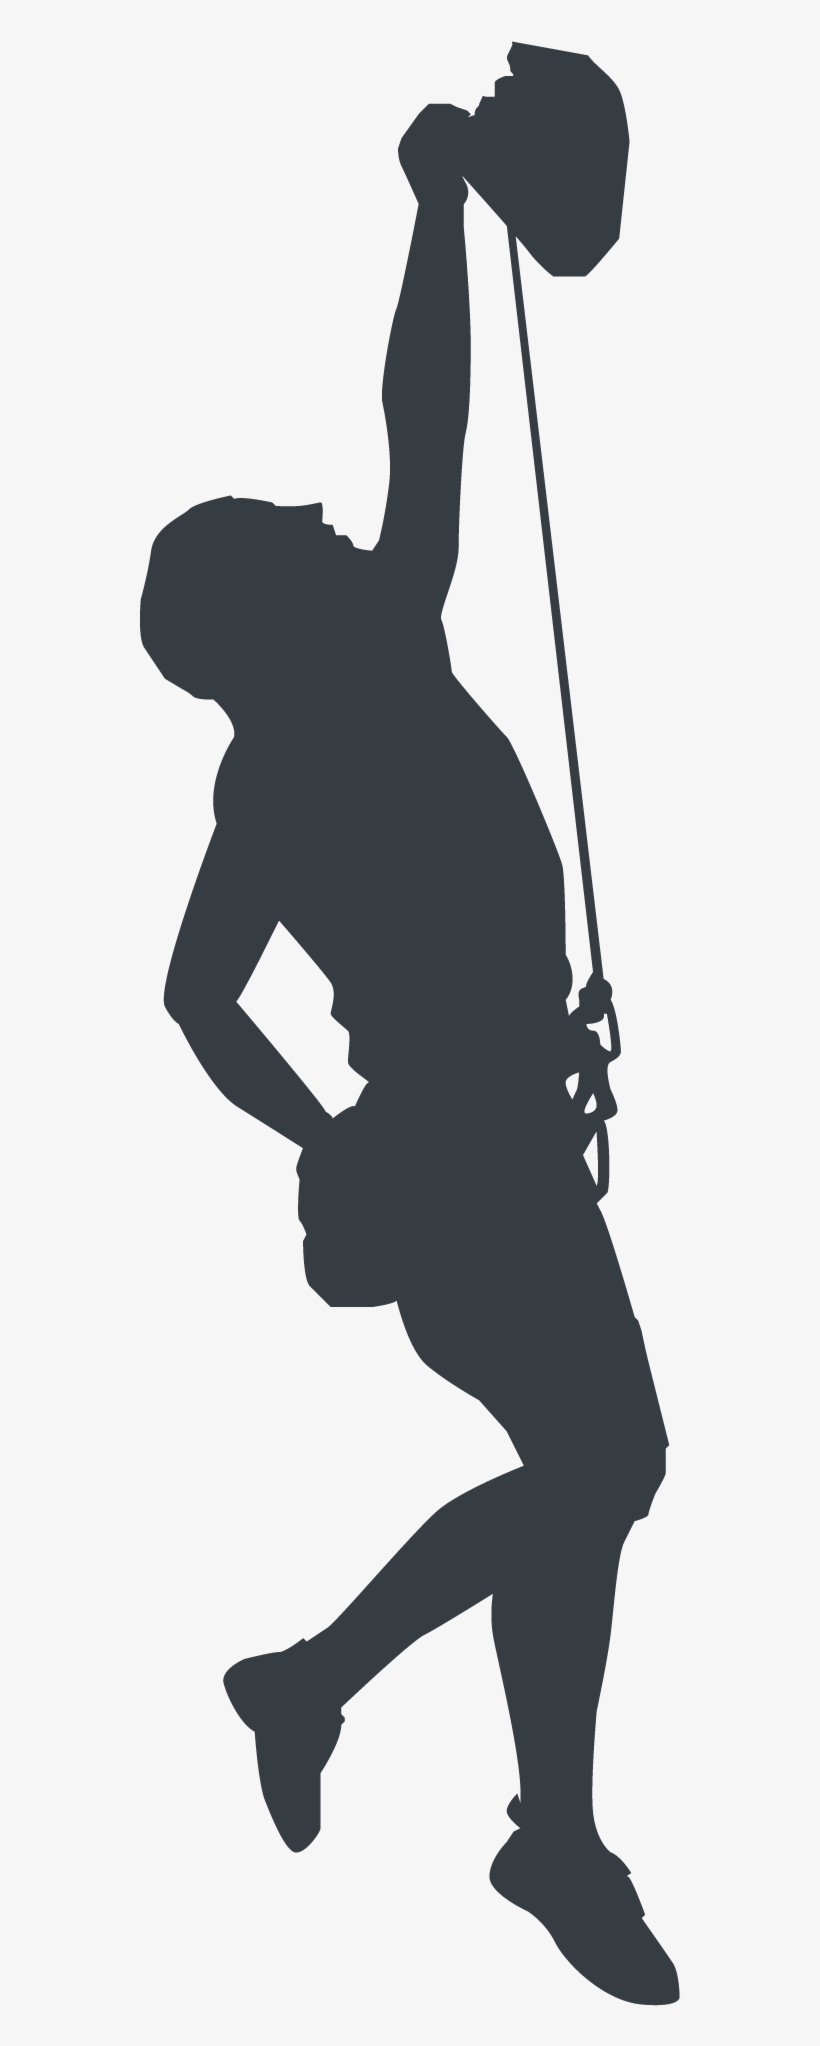 Athlete Silhouette - Rock Climbing Mountain Clipart, transparent png #4377675